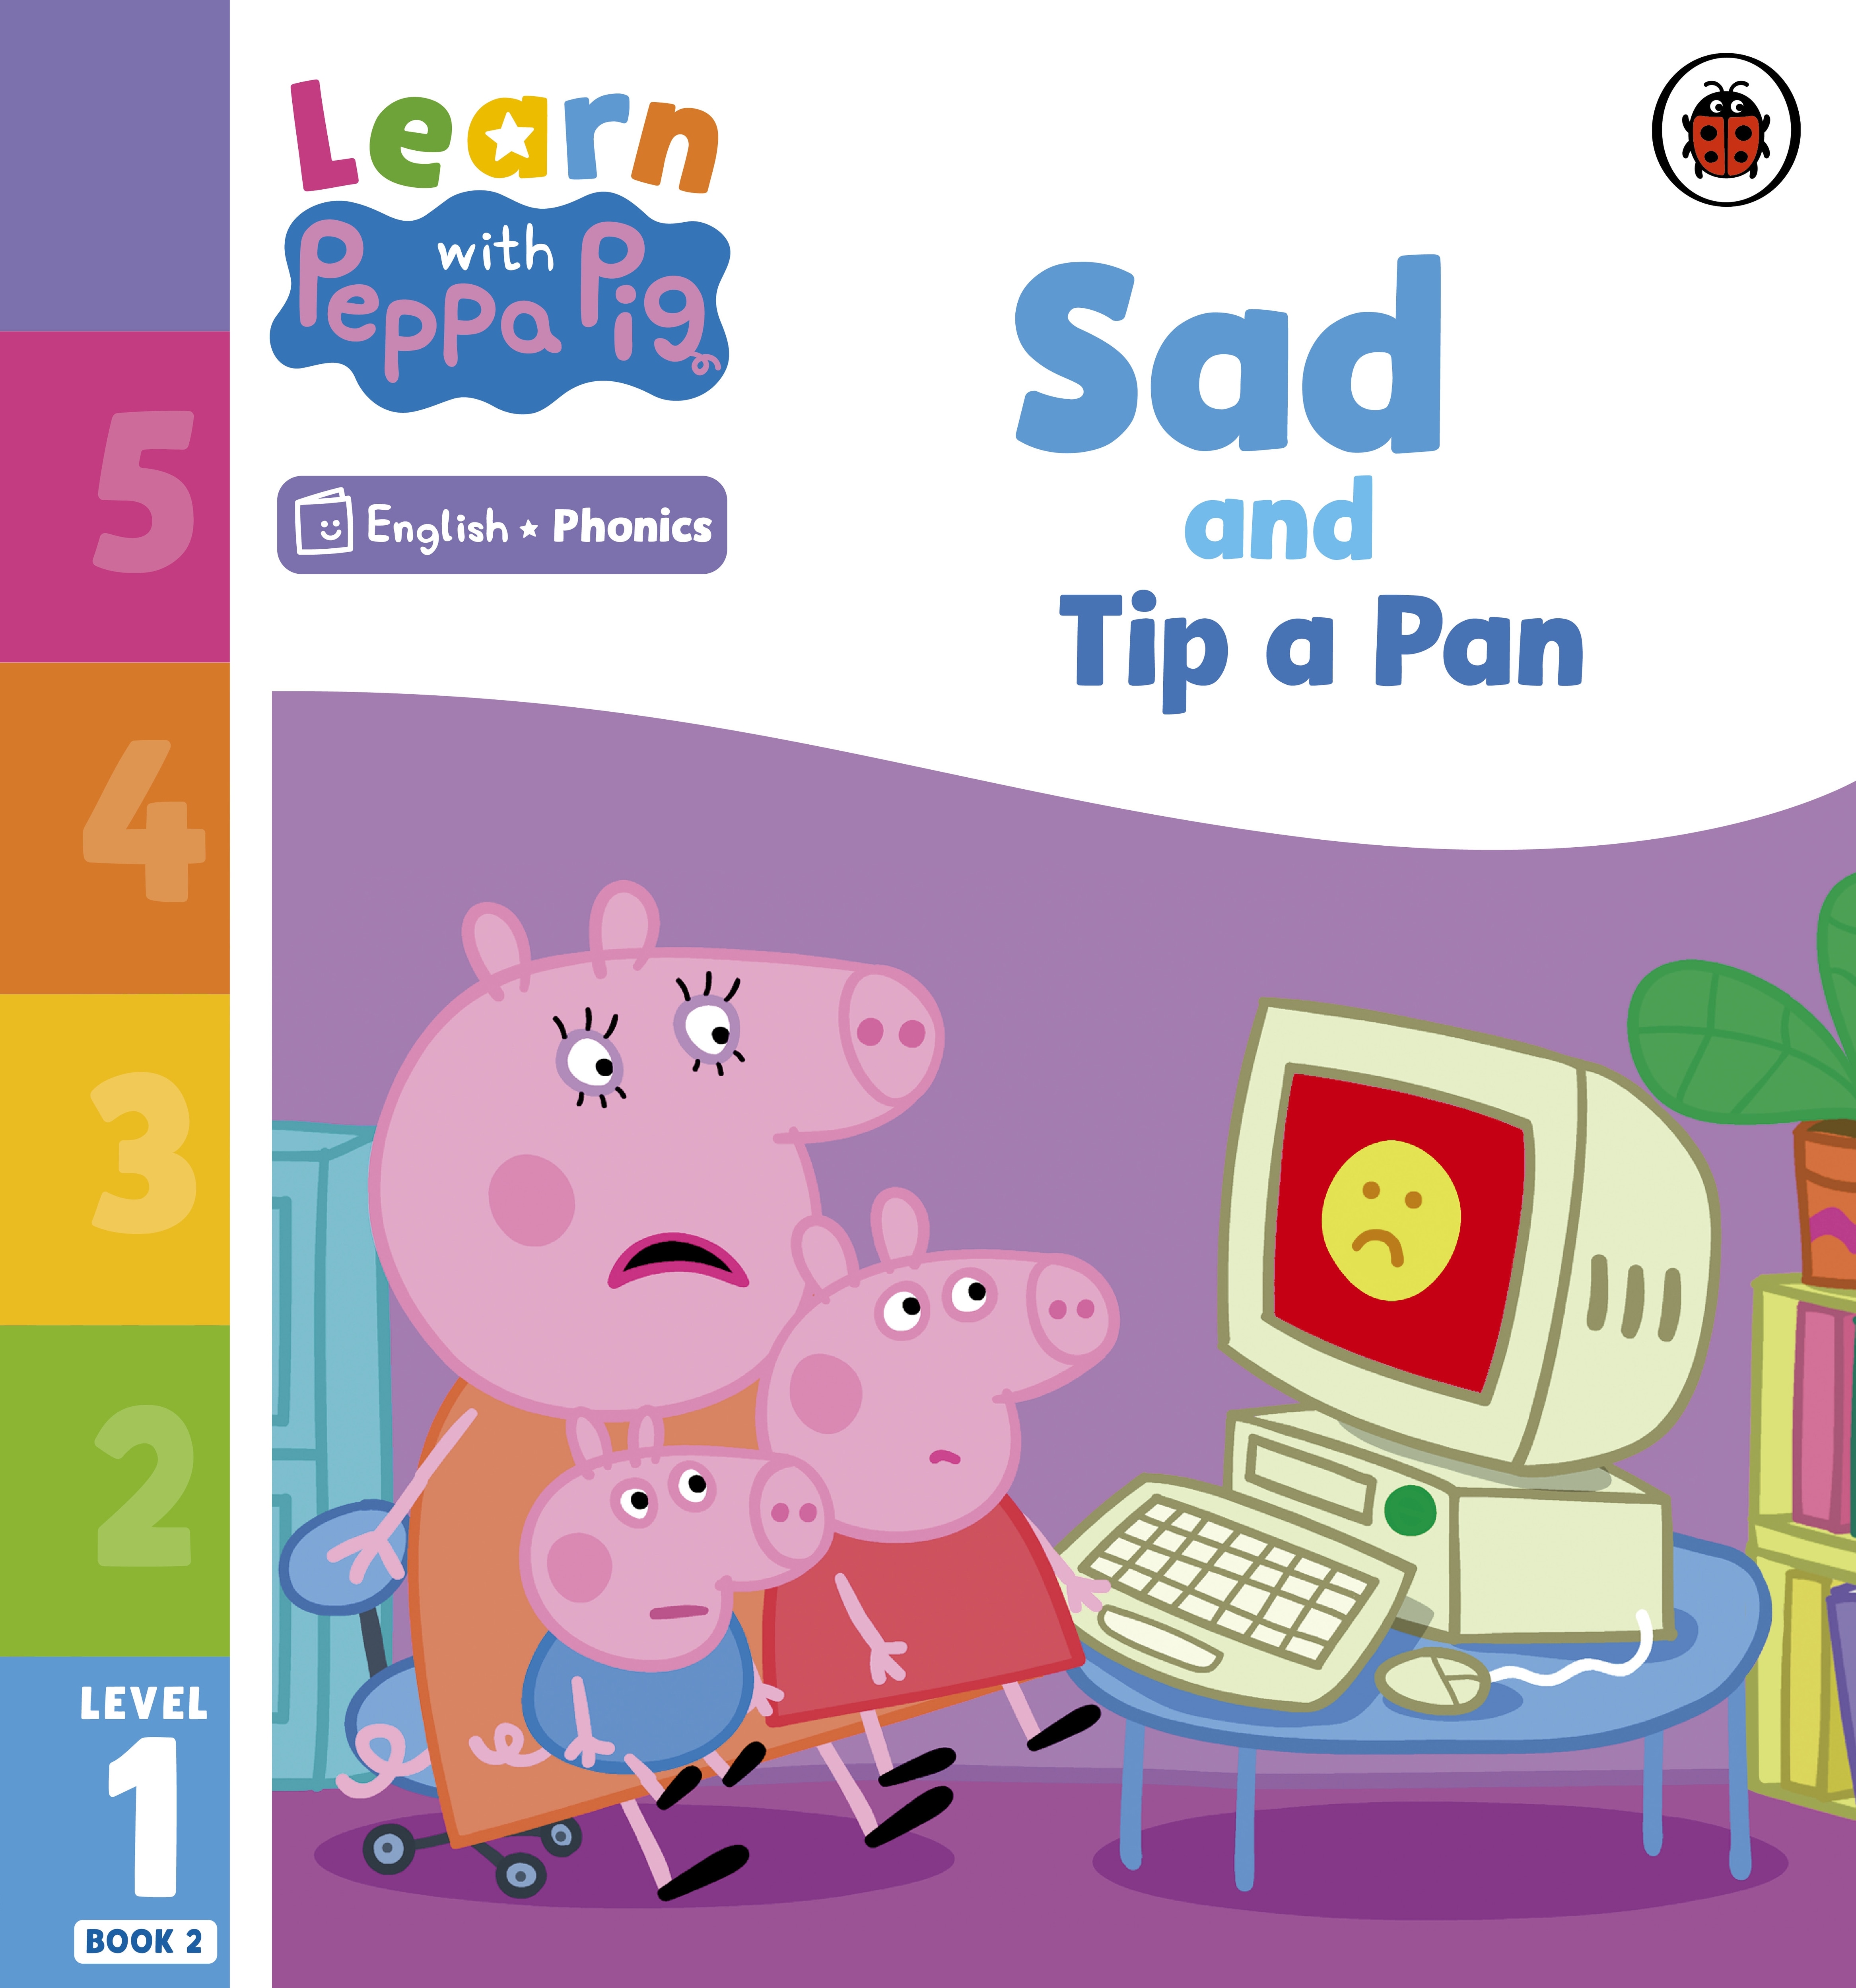 Book “Learn with Peppa Phonics Level 1 Book 2 — Sad and Tip a Pan (Phonics Reader)” by Peppa Pig — January 5, 2023